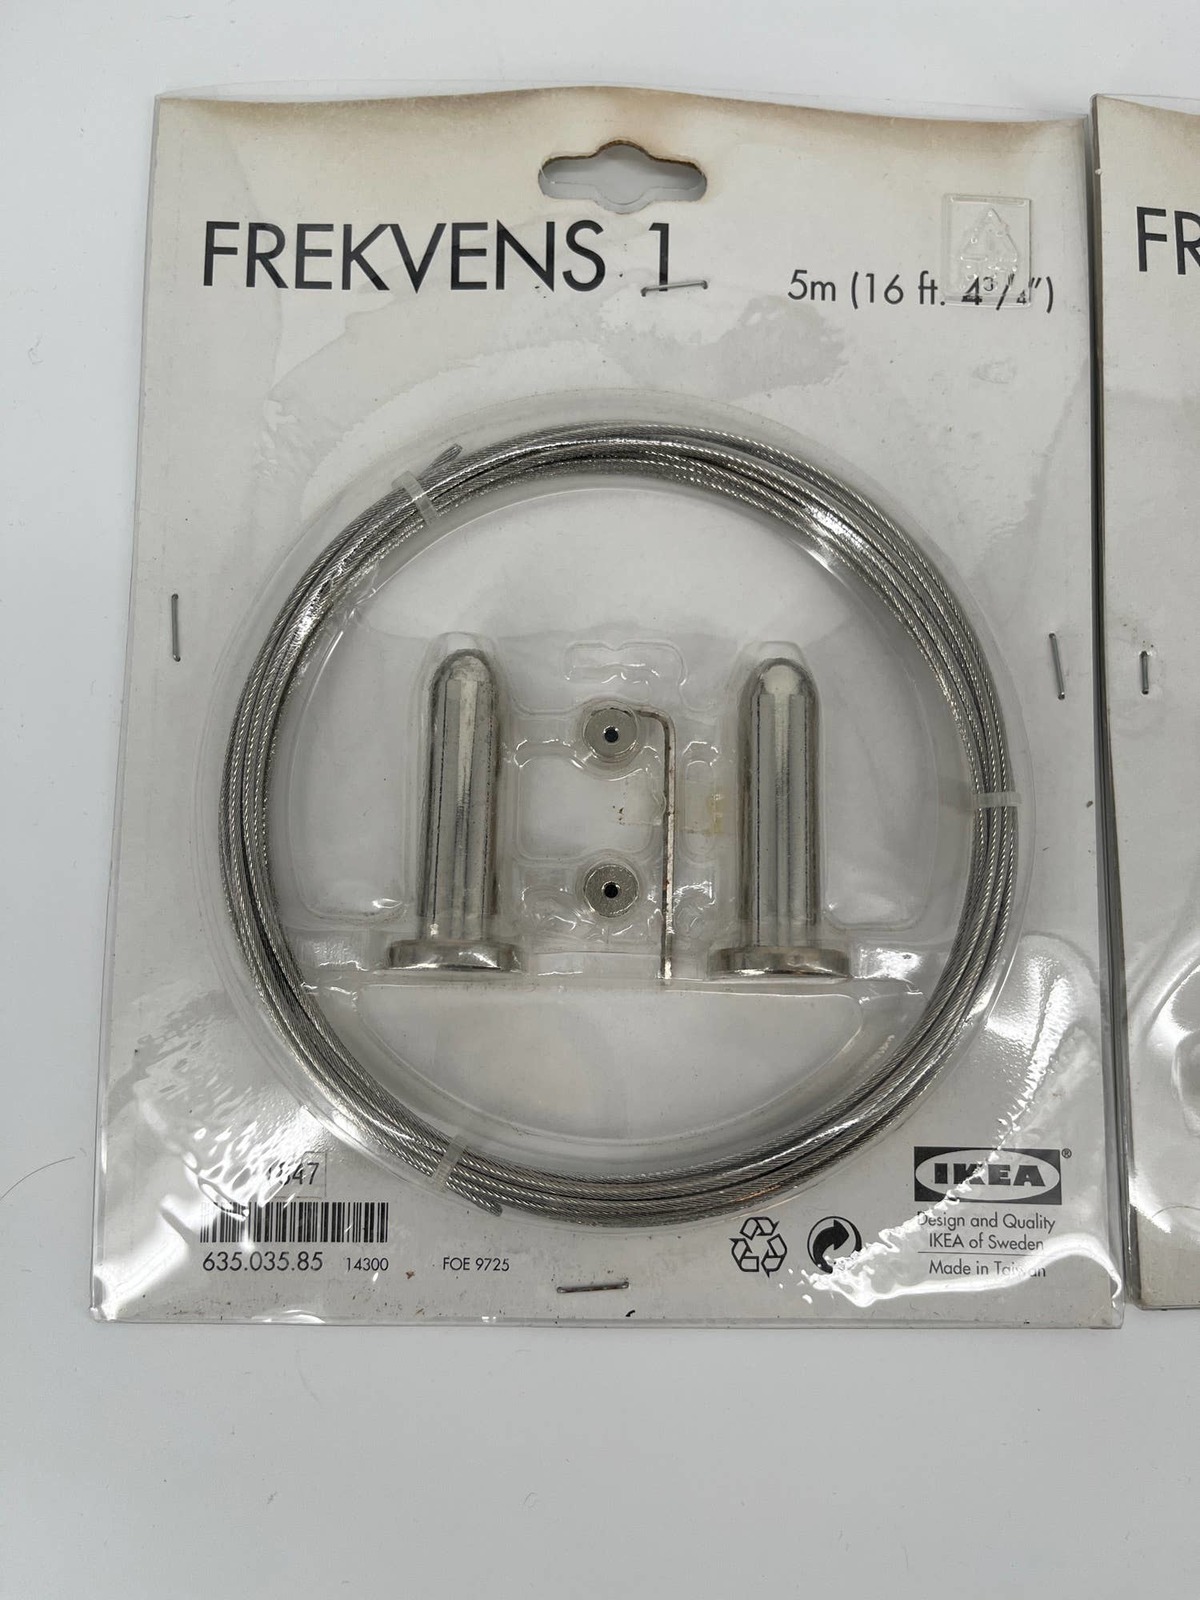 Ikea Frekvens 1&2 Curtain Wire Support Fixture Stainless Steel New Discontinued - $29.40